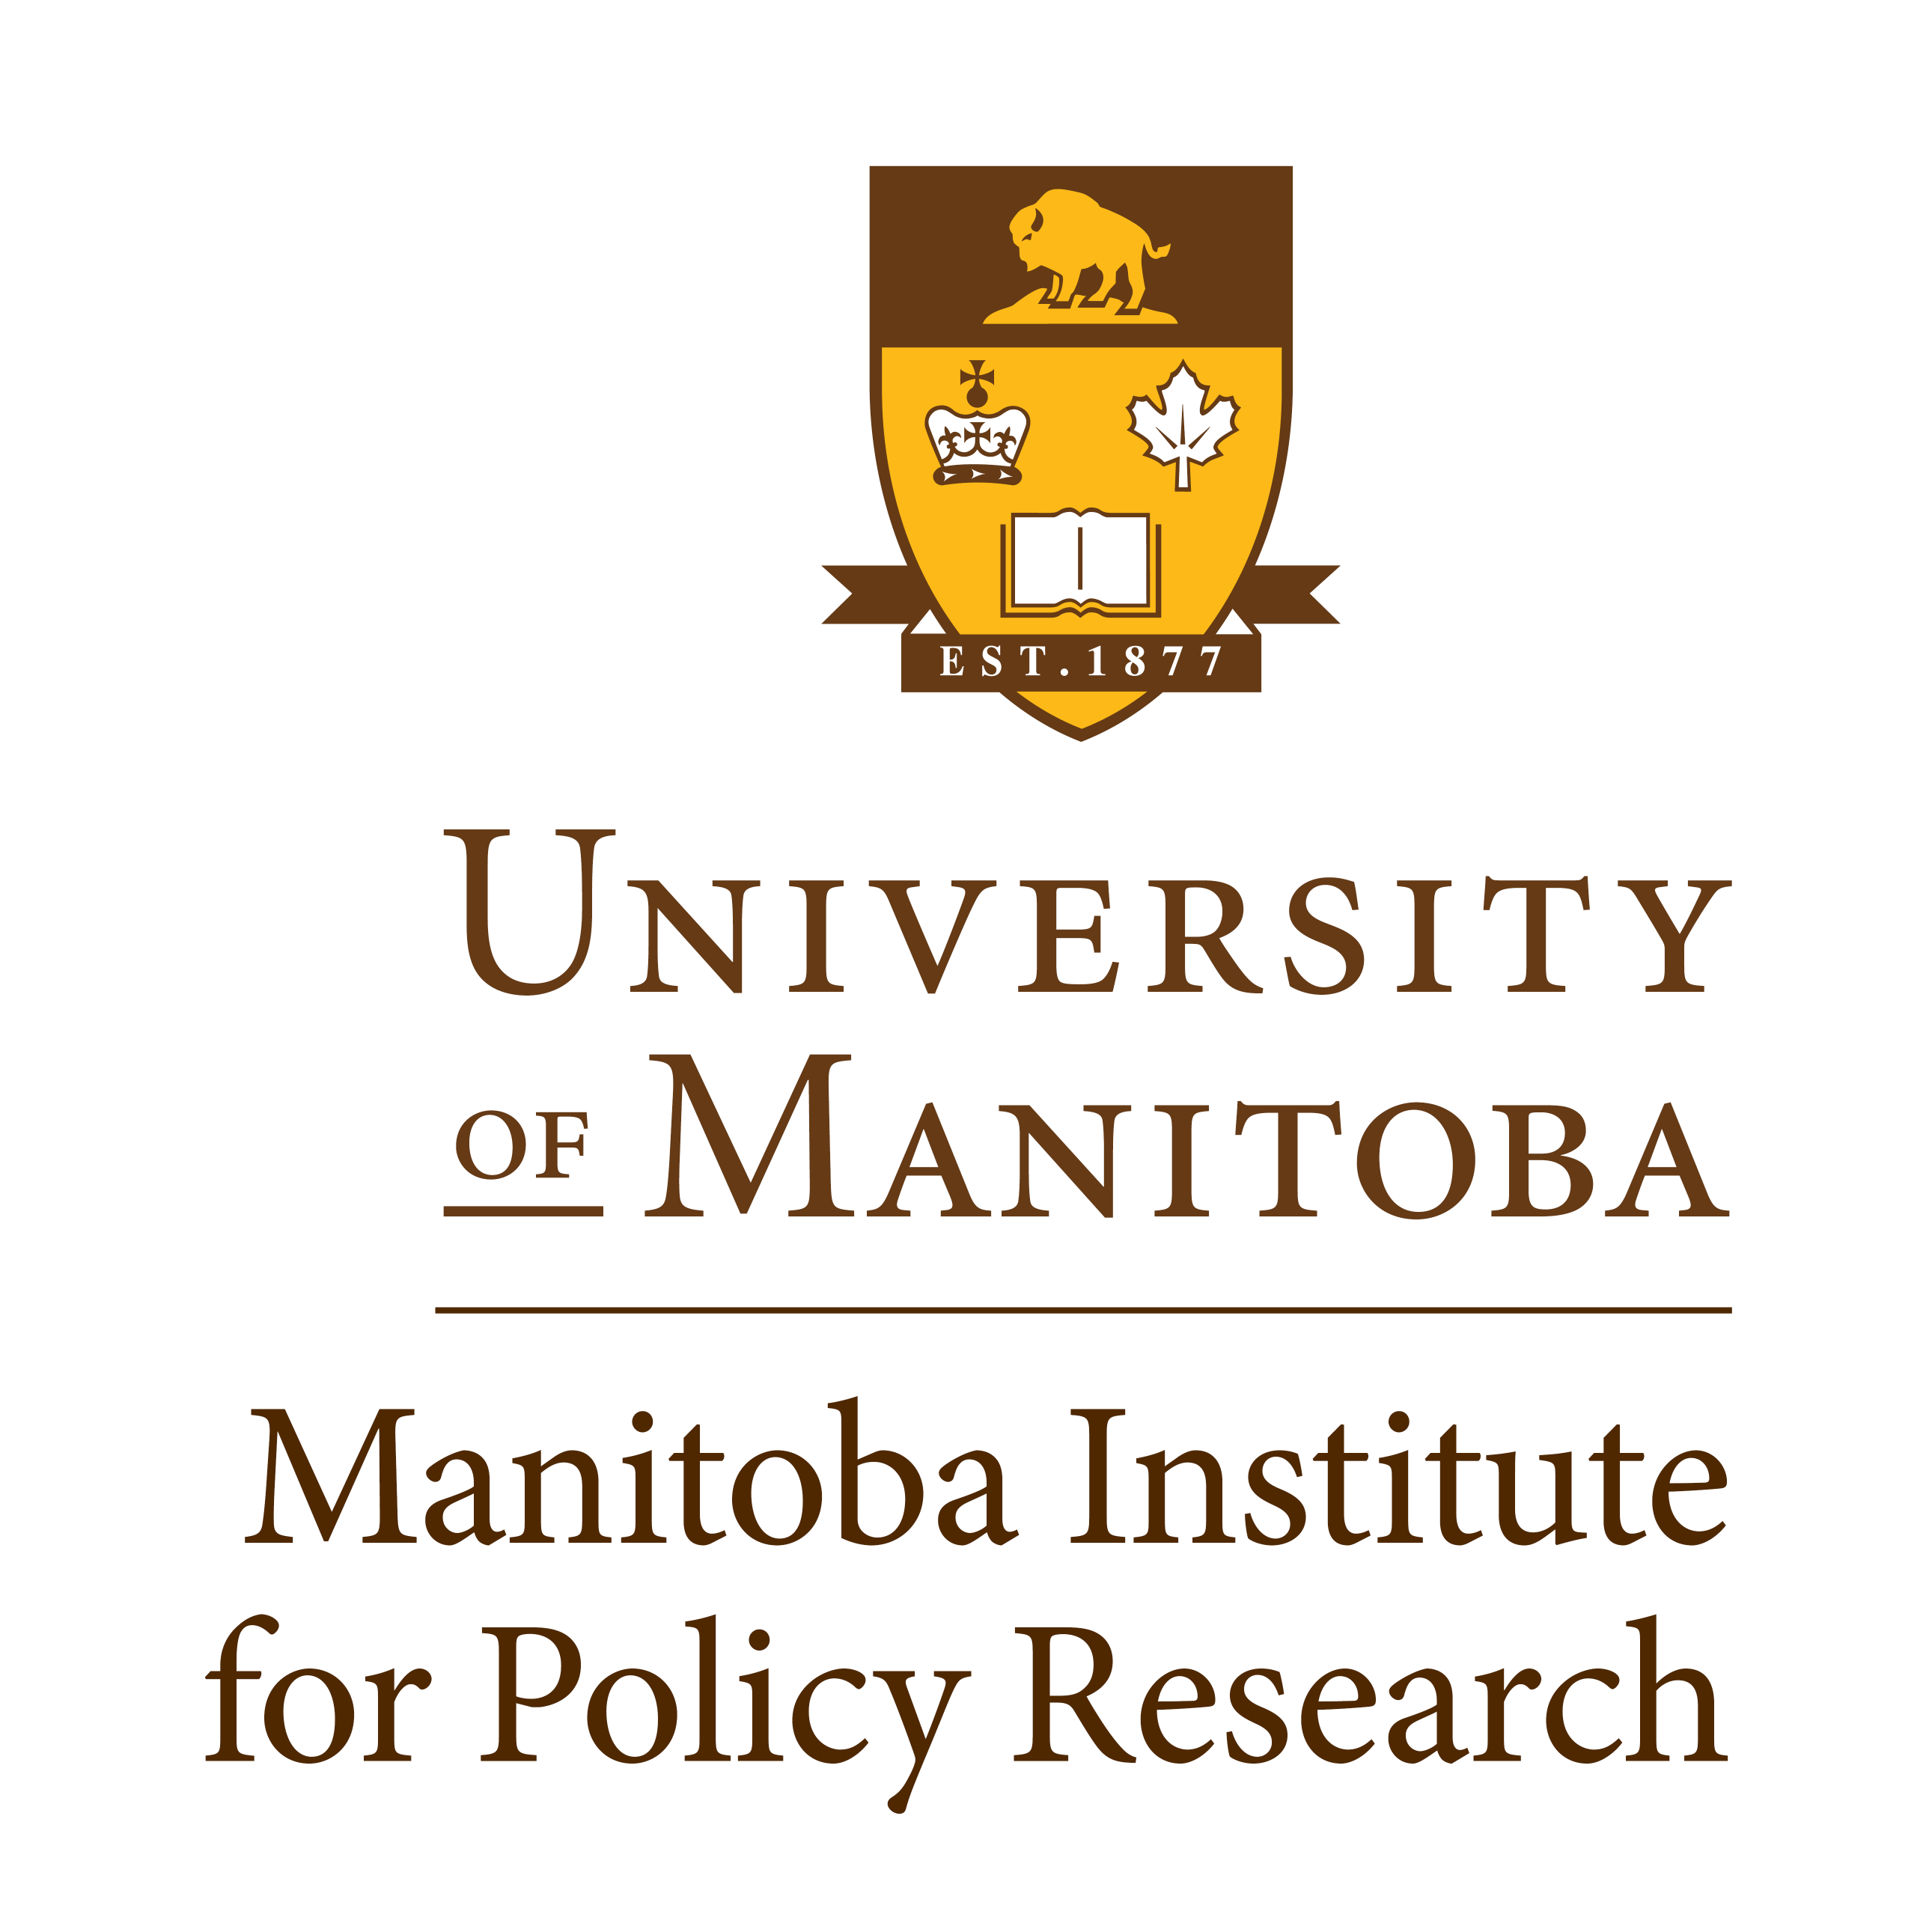 Welcome to the Manitoba Institute for Policy Research Twitter feed. The Institute is a hub for academic analysis, public policy discourse, and outreach.